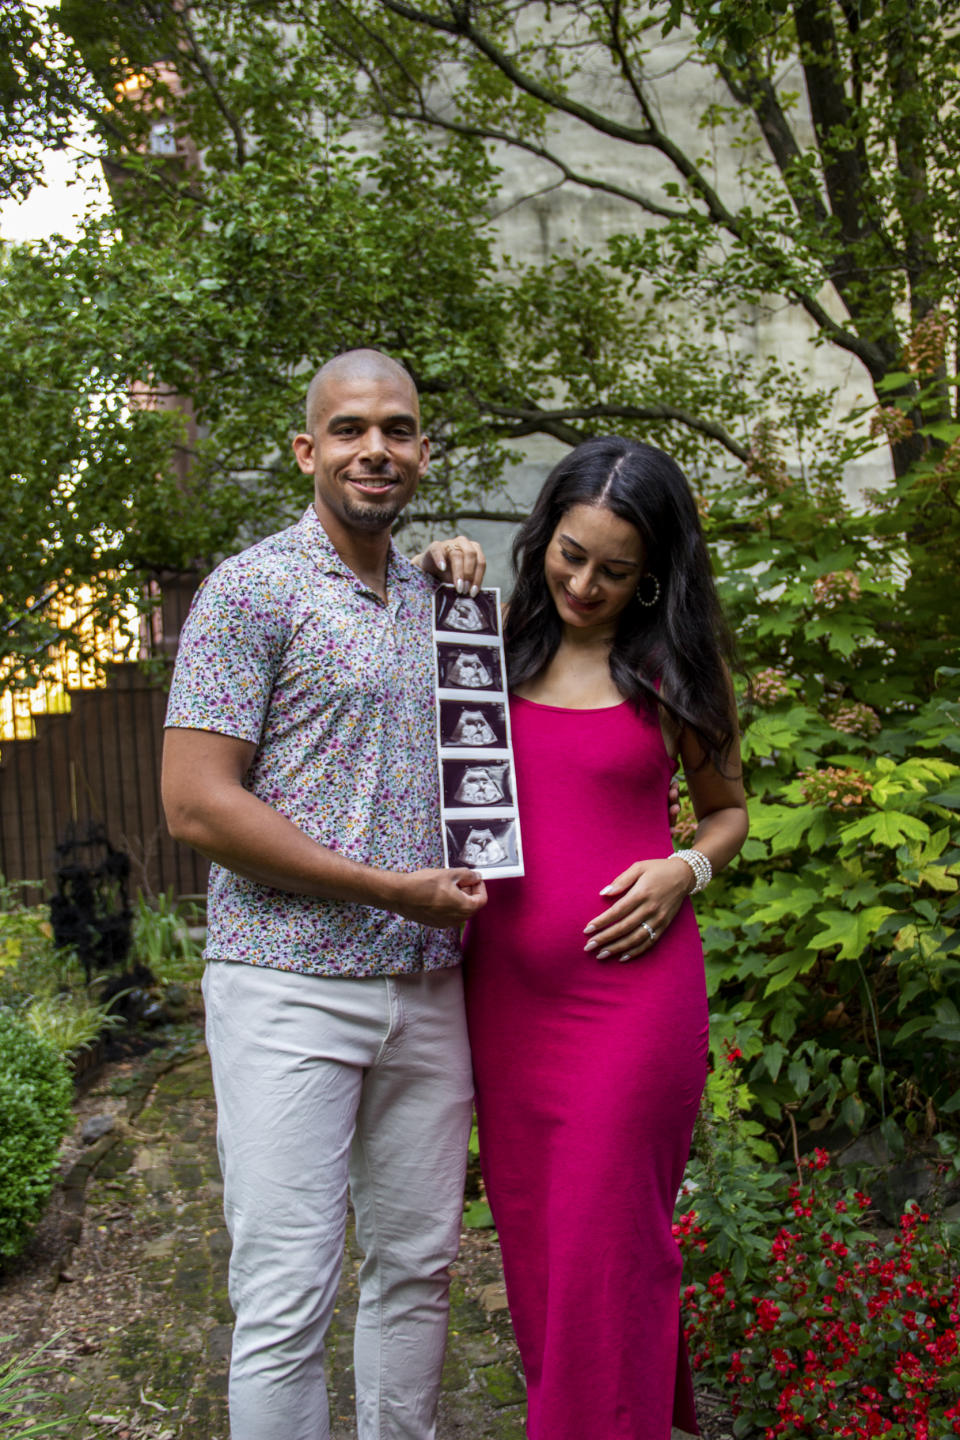 Image: NBC correspondent Morgan Radford and her husband, David Williams, are expecting their first child together. (Mariano Martínez)